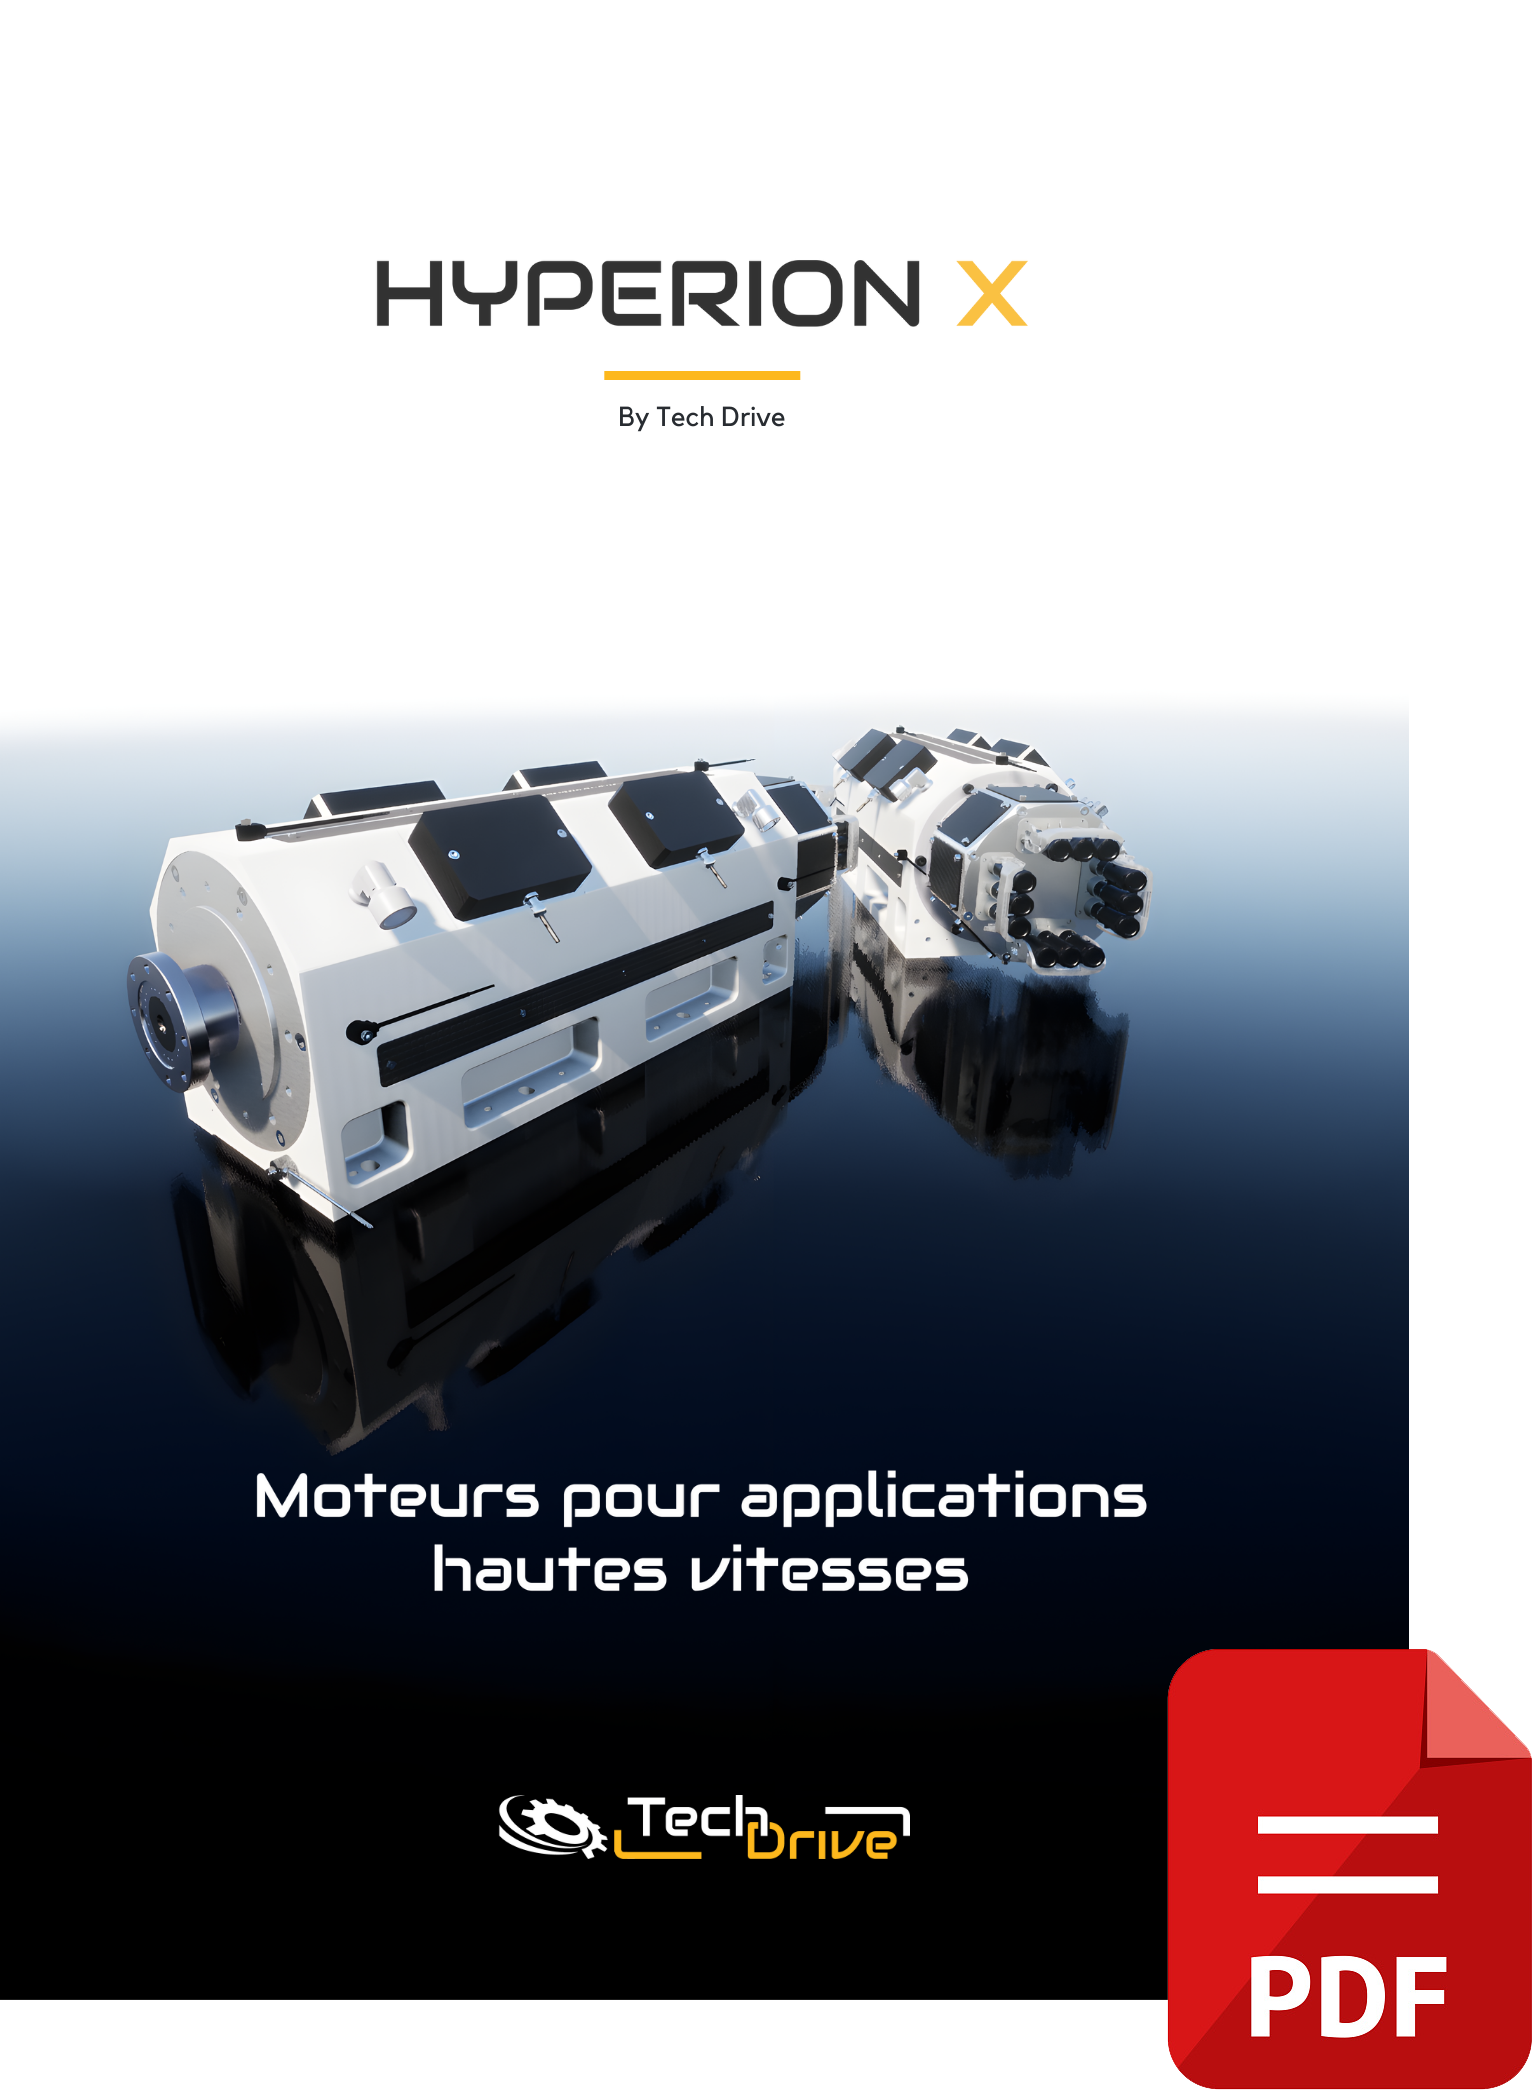 HYPERION X catalog - Motors for high-speed applications